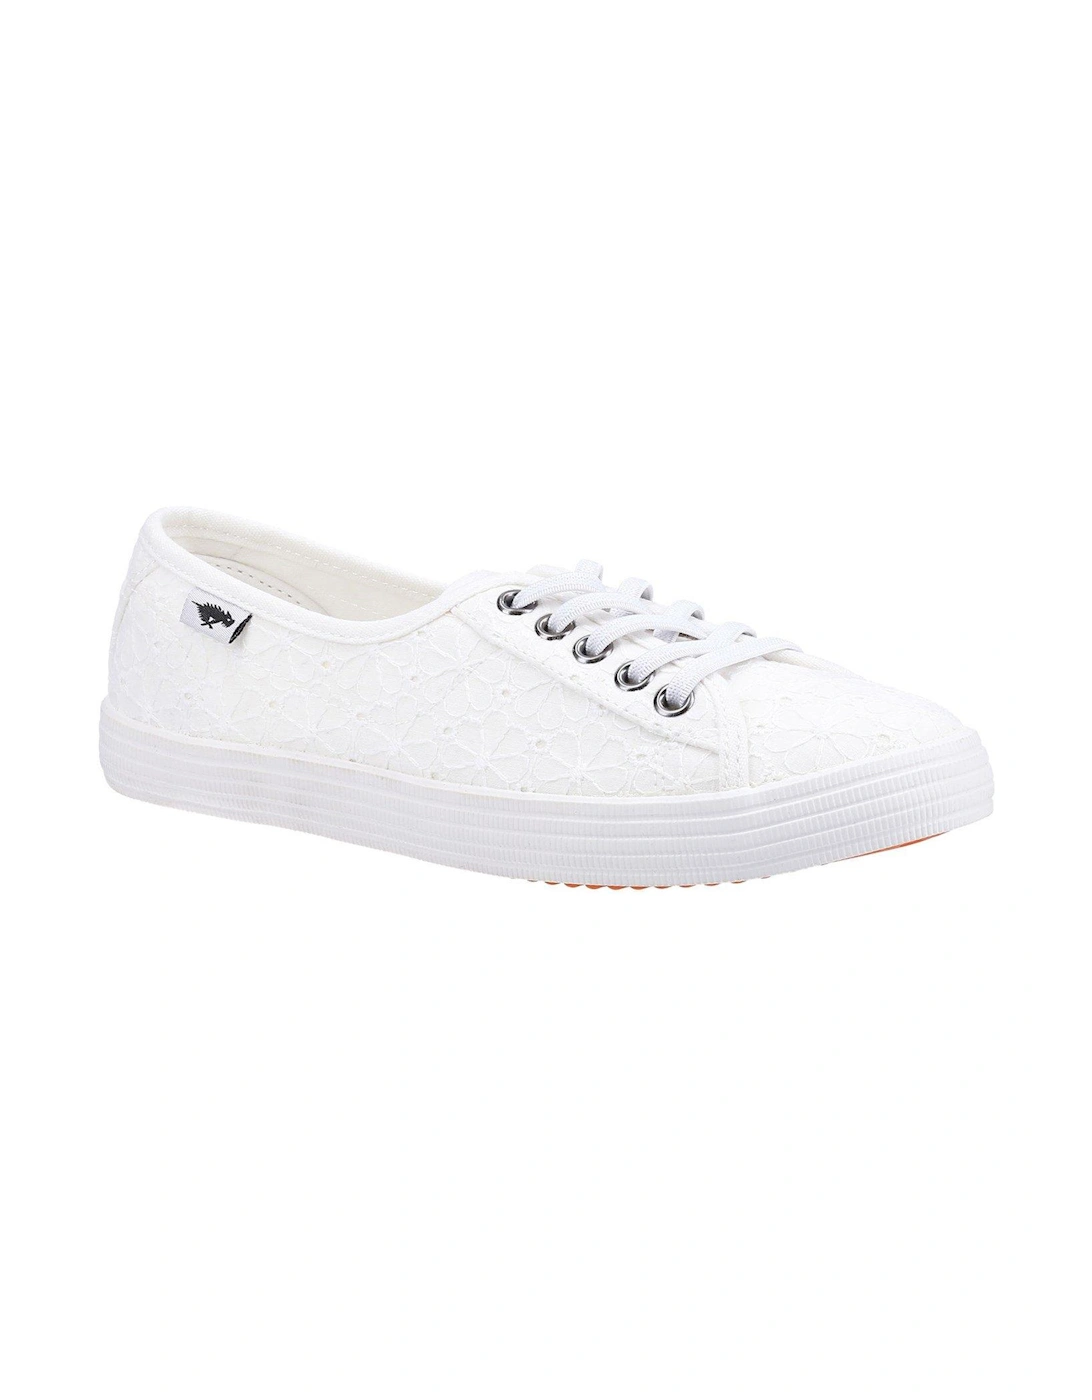 Chow Chow Summer Jersey Plimsolls - White